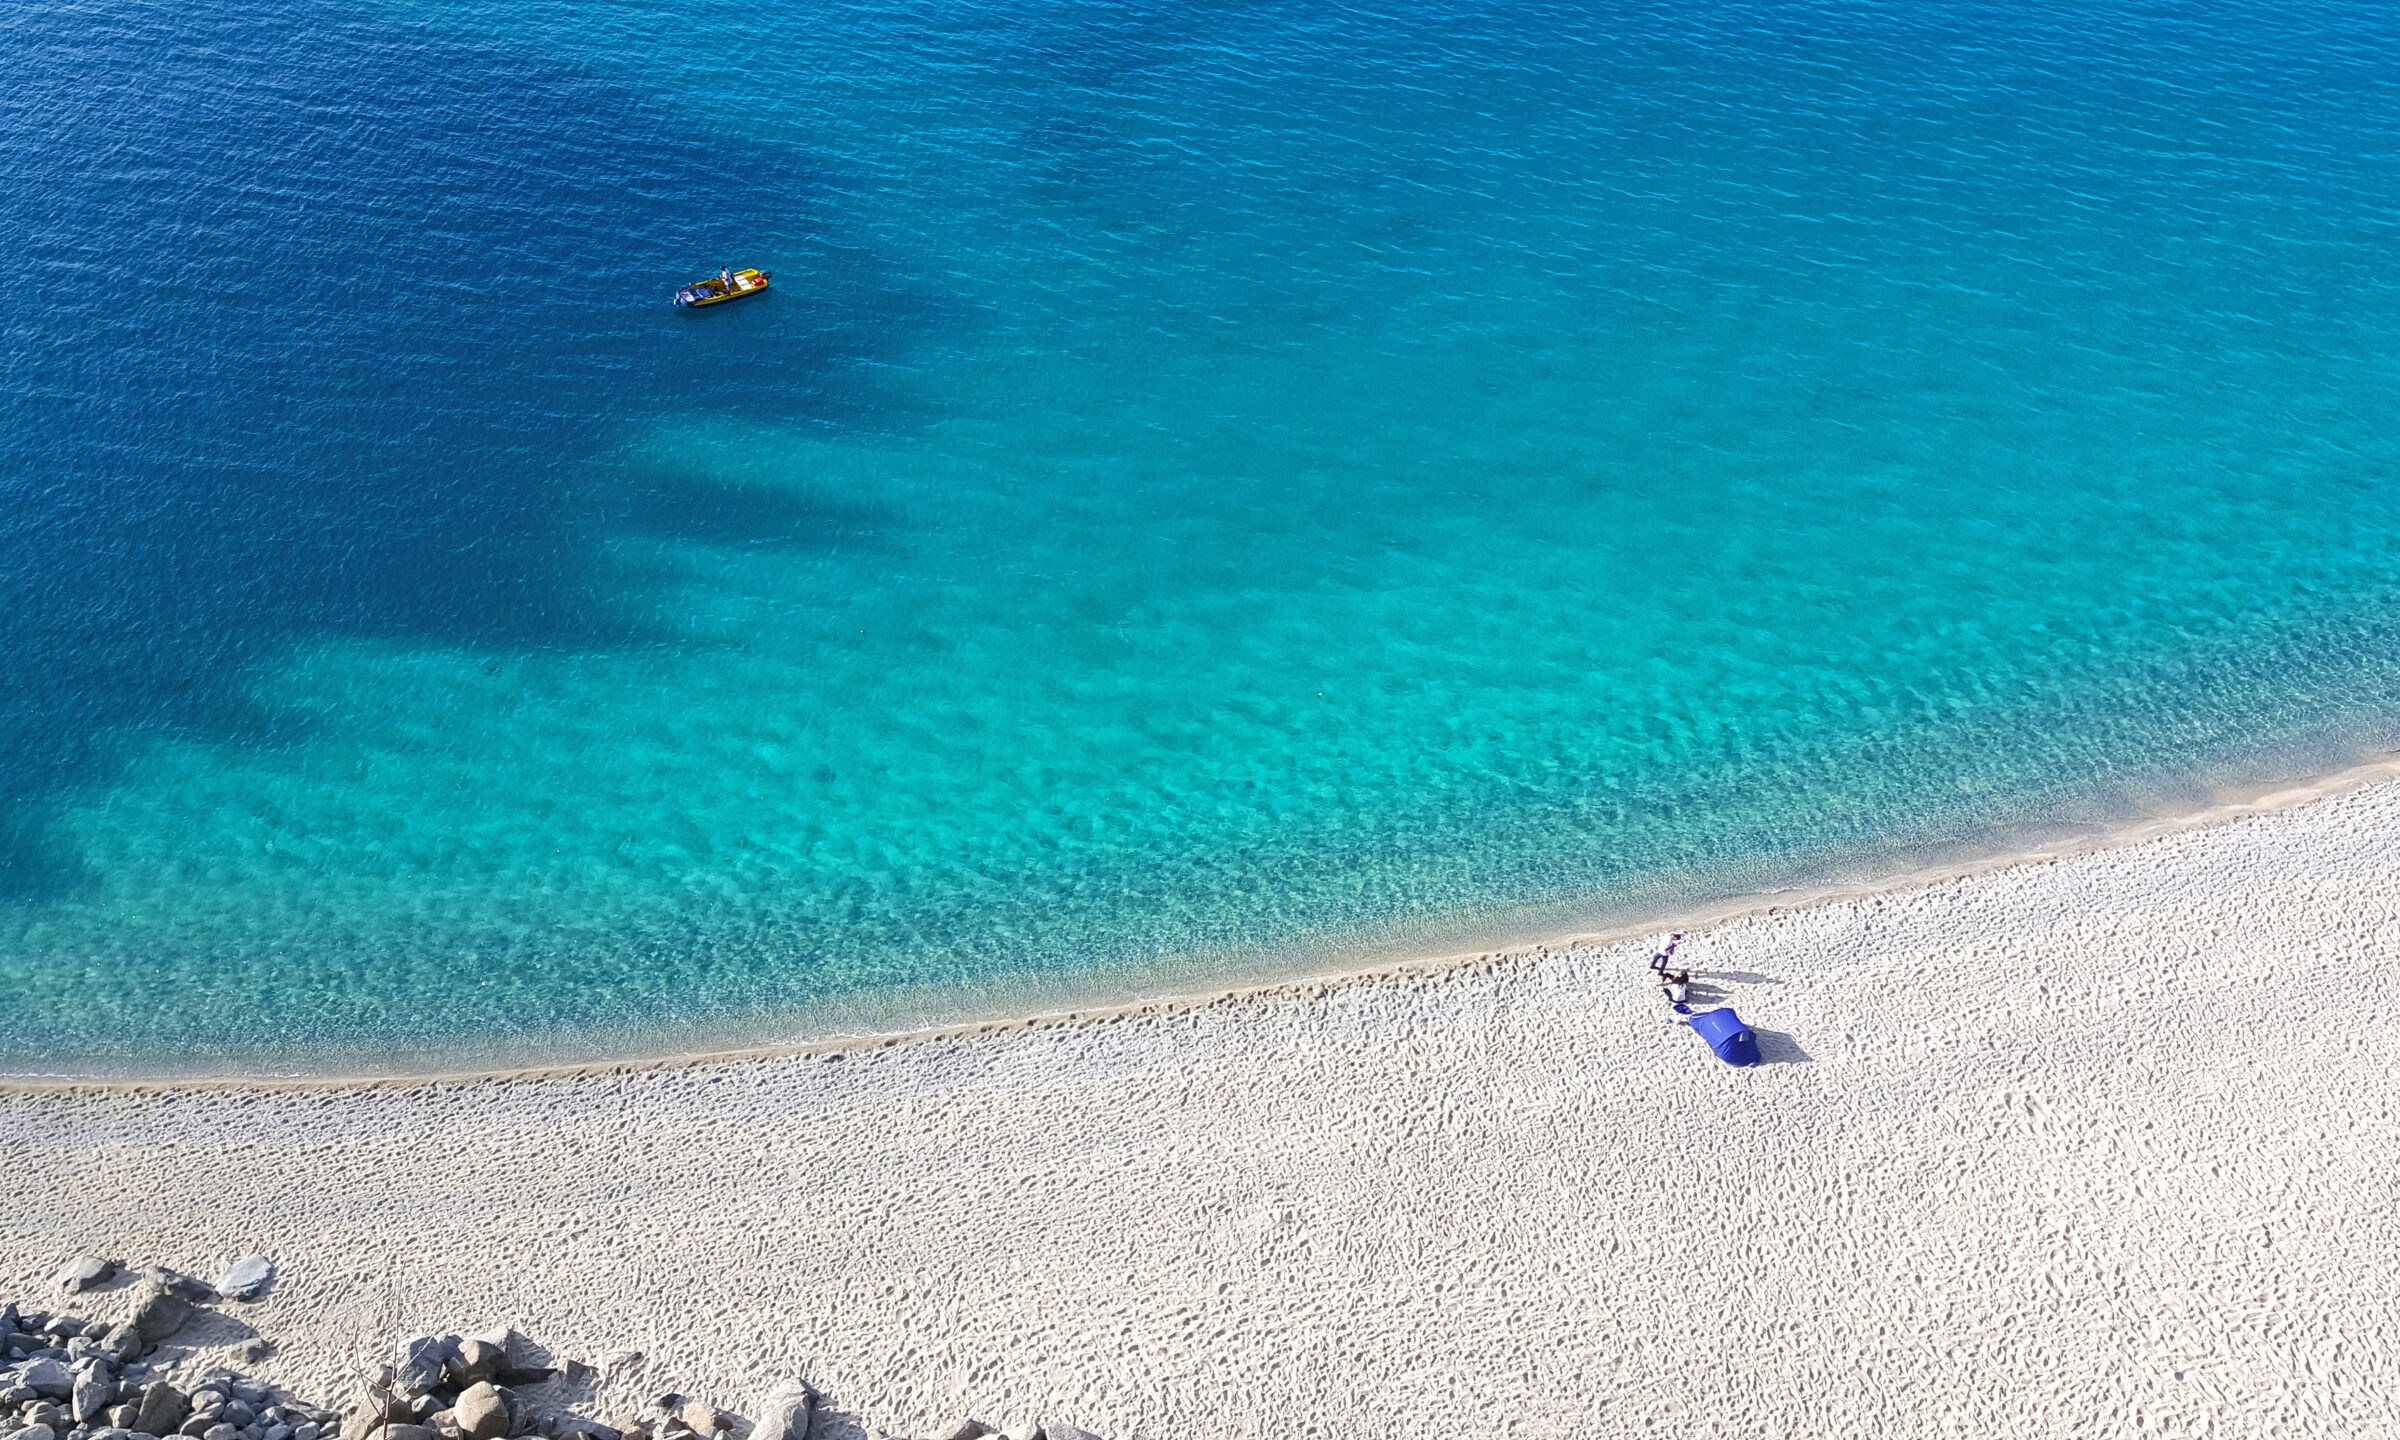 Crystal clear waters in Tropea located in the South of Italy